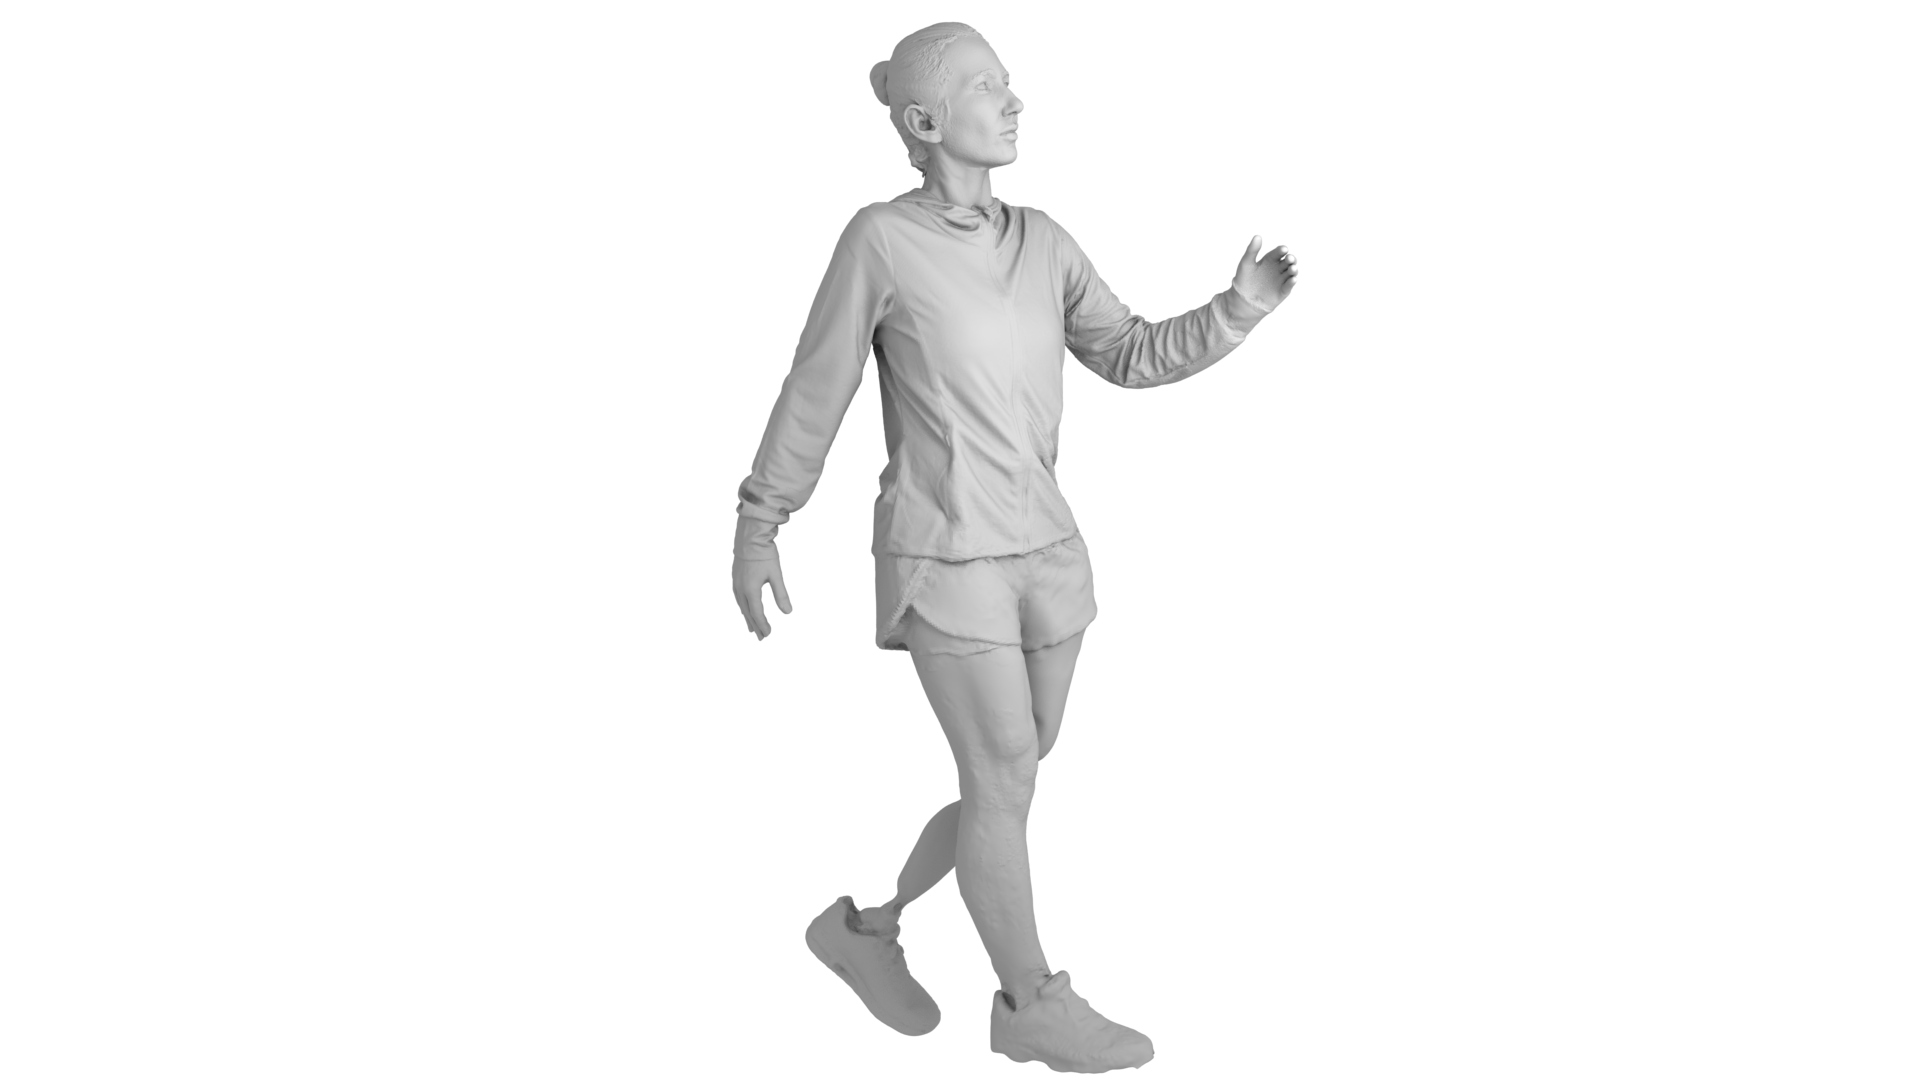 3D Scanned Poses. Amputee 3D Scanned in Walking Pose. 3D Scanned at Repronauts' photogrammetry studio, London, UK. 